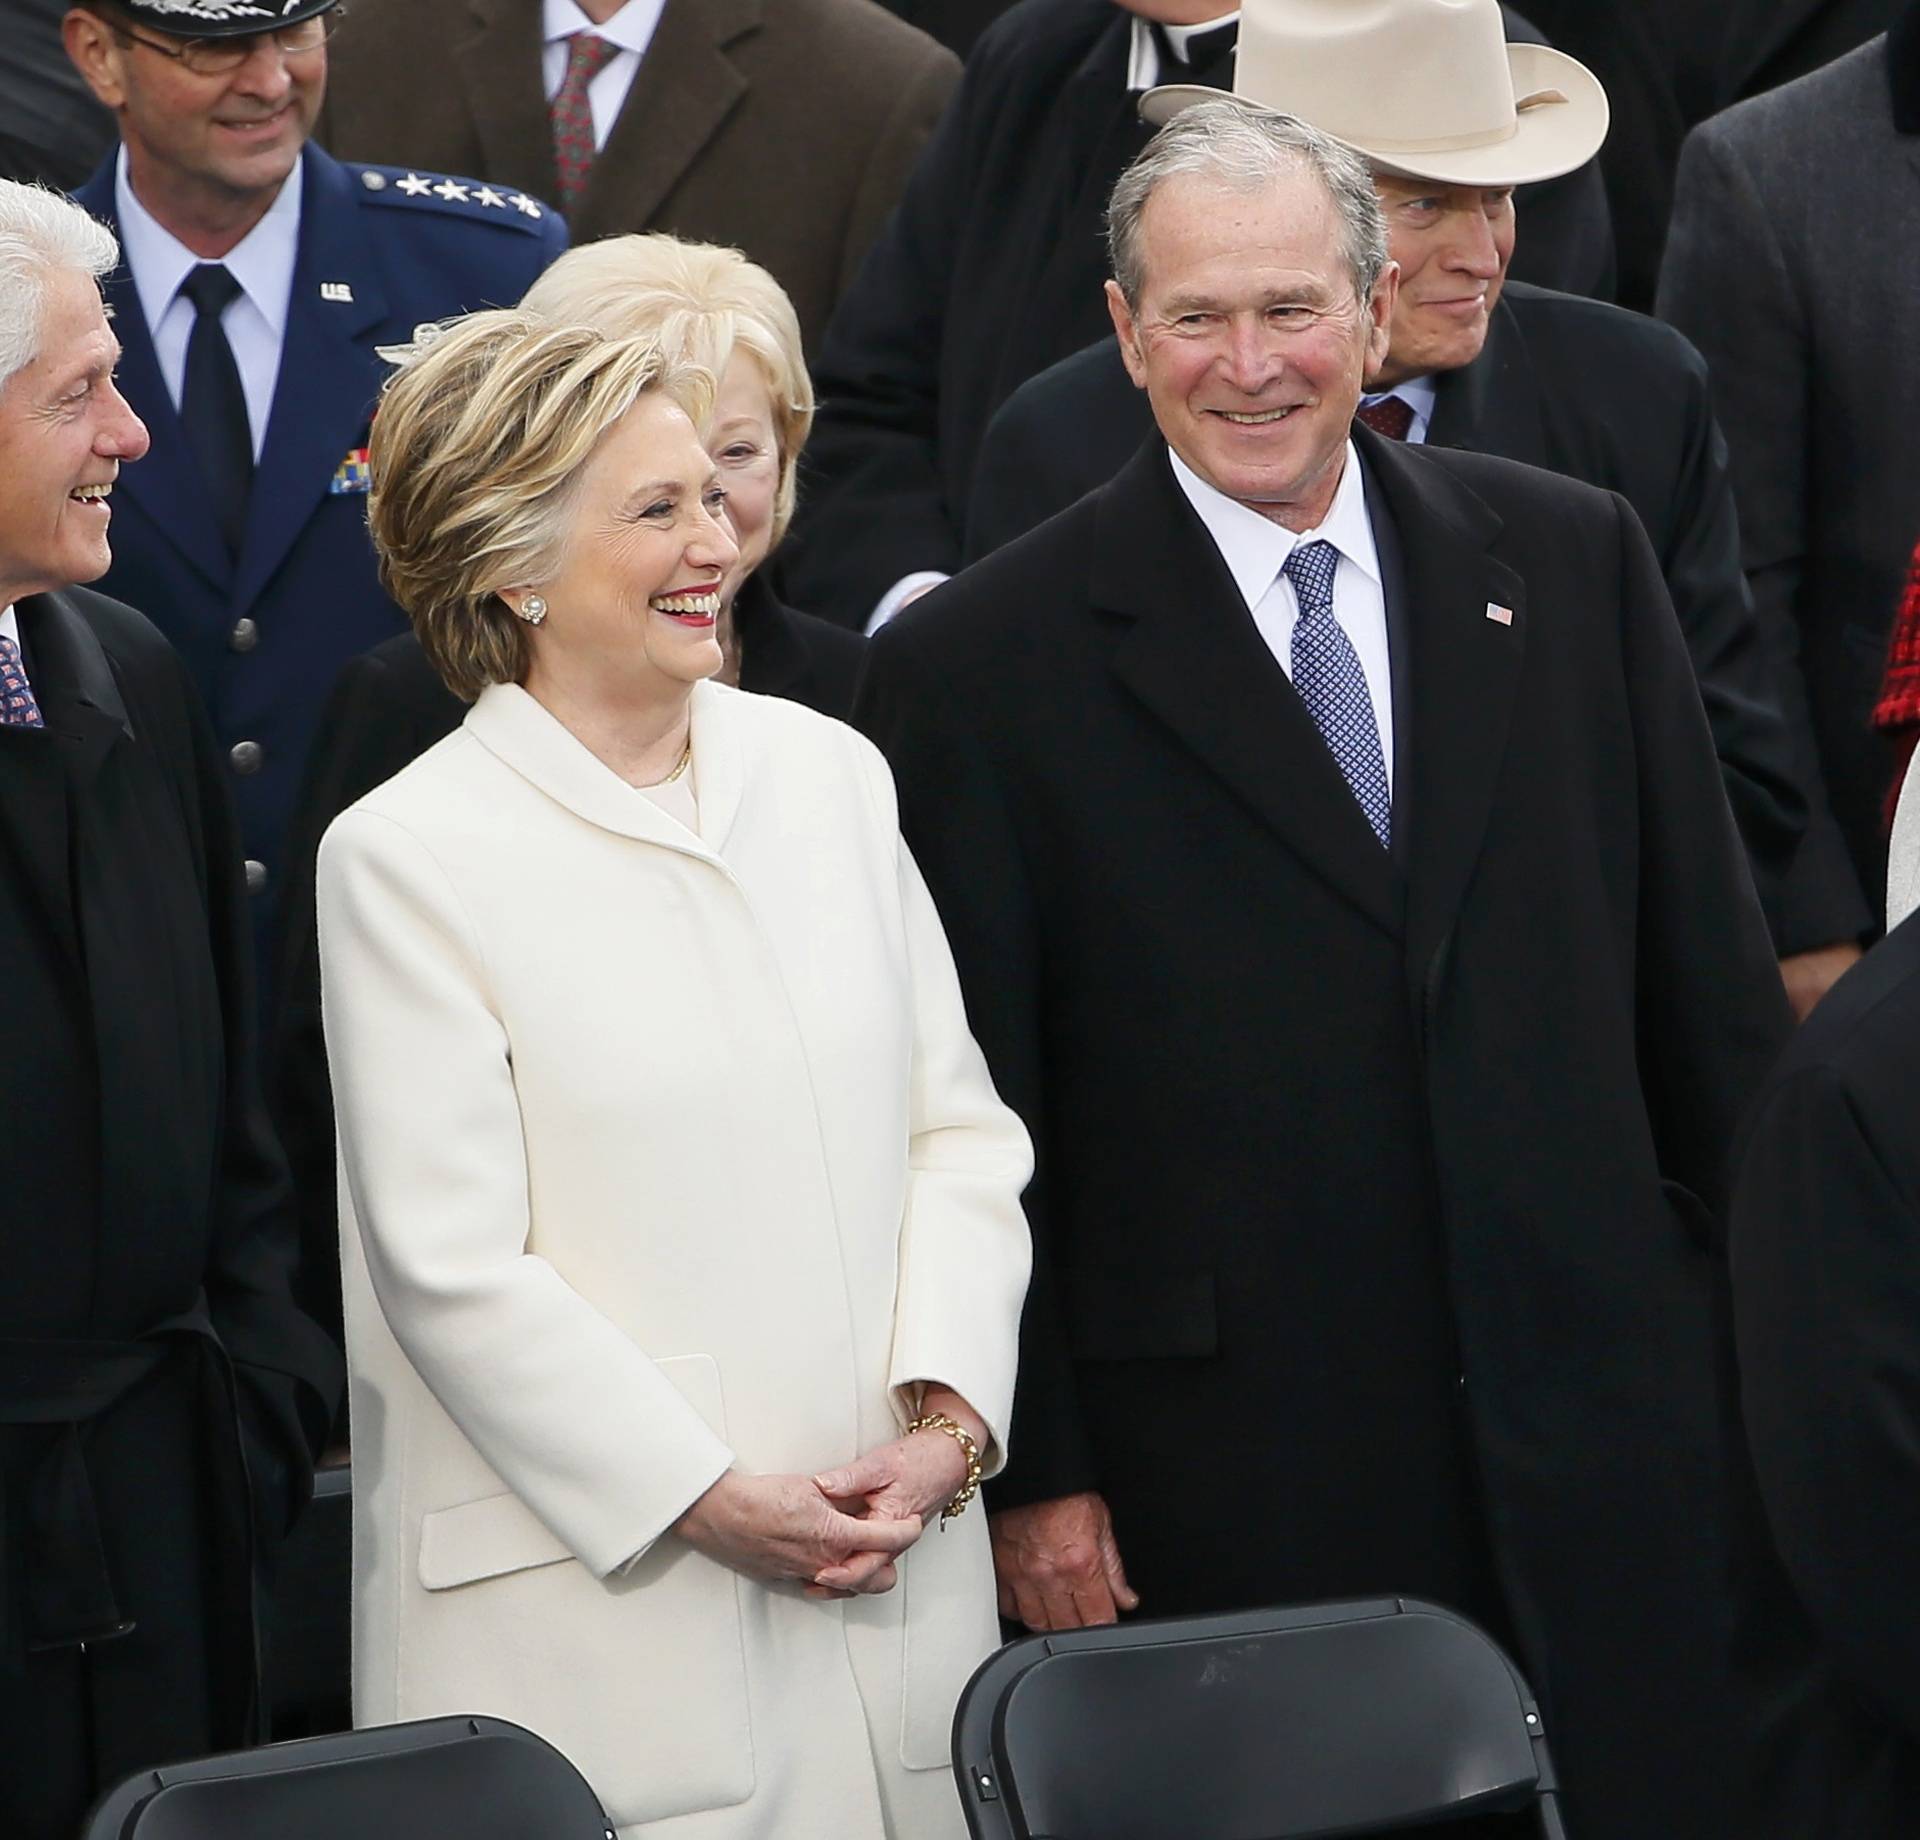 Hillary Clinton stands between former Presidents Bill Clinton and George W. Bush during inauguration ceremonies in Washington